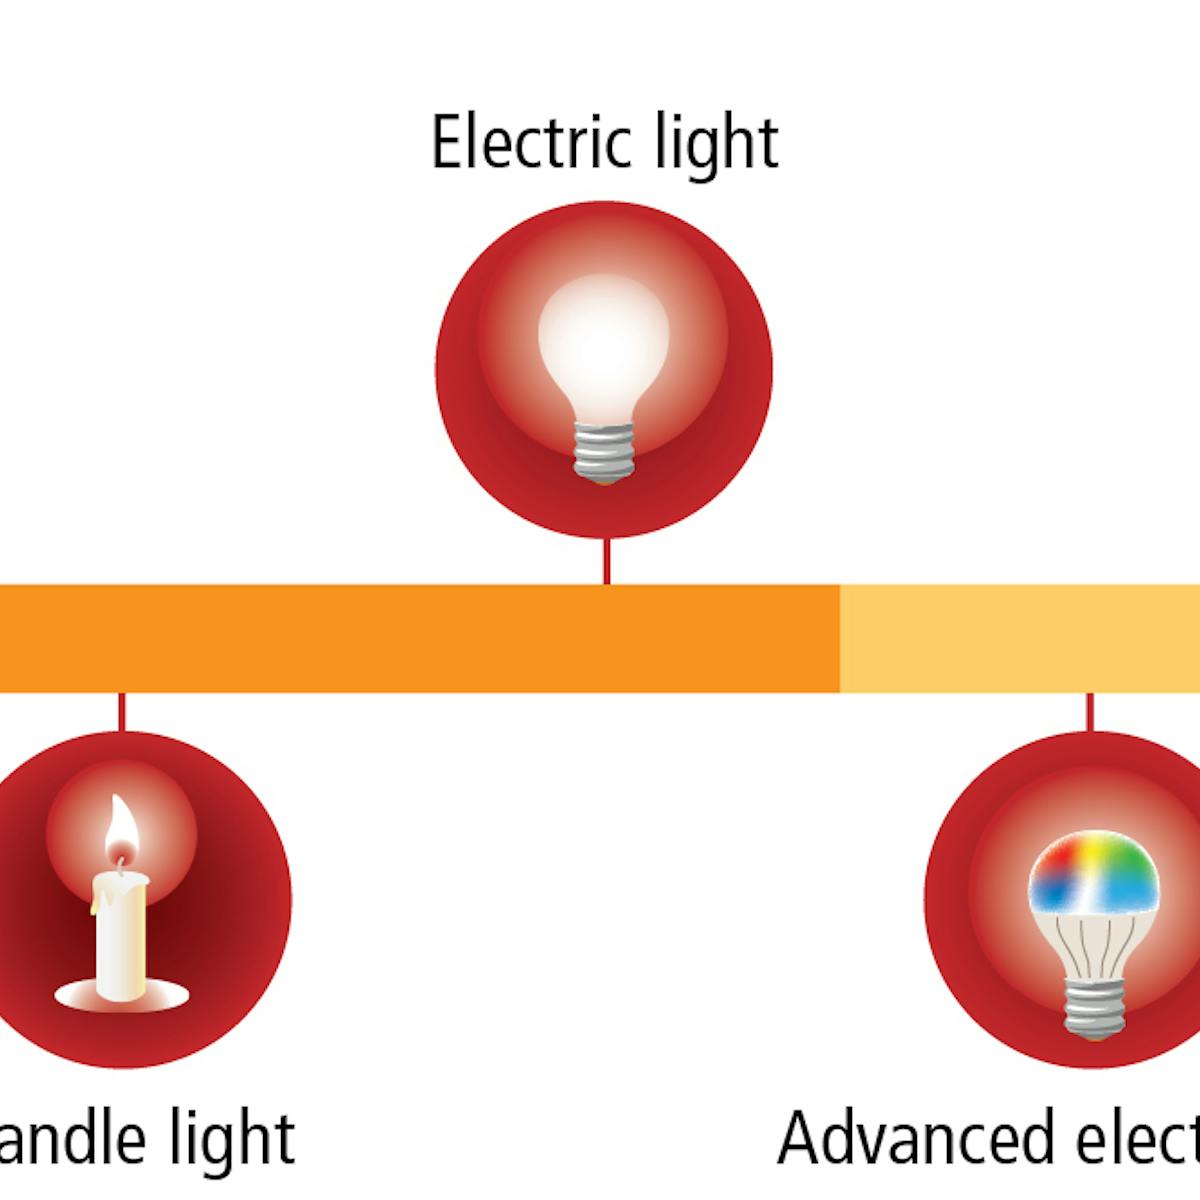 FIG. 1. The timeline of light sources relied upon by humans has evolved from one focused on the source of illumination for visual acuity alone to one that applies advanced research to evoke or inhibit certain responses from the non-visual system. The research will deliver new information to the solid-state lighting (SSL) industry for producing metrics that enable standards and best practices development for products and lighting designs. [Image credits: All illustrations courtesy of Allison Thayer, the Lighting Research Center (LRC).]